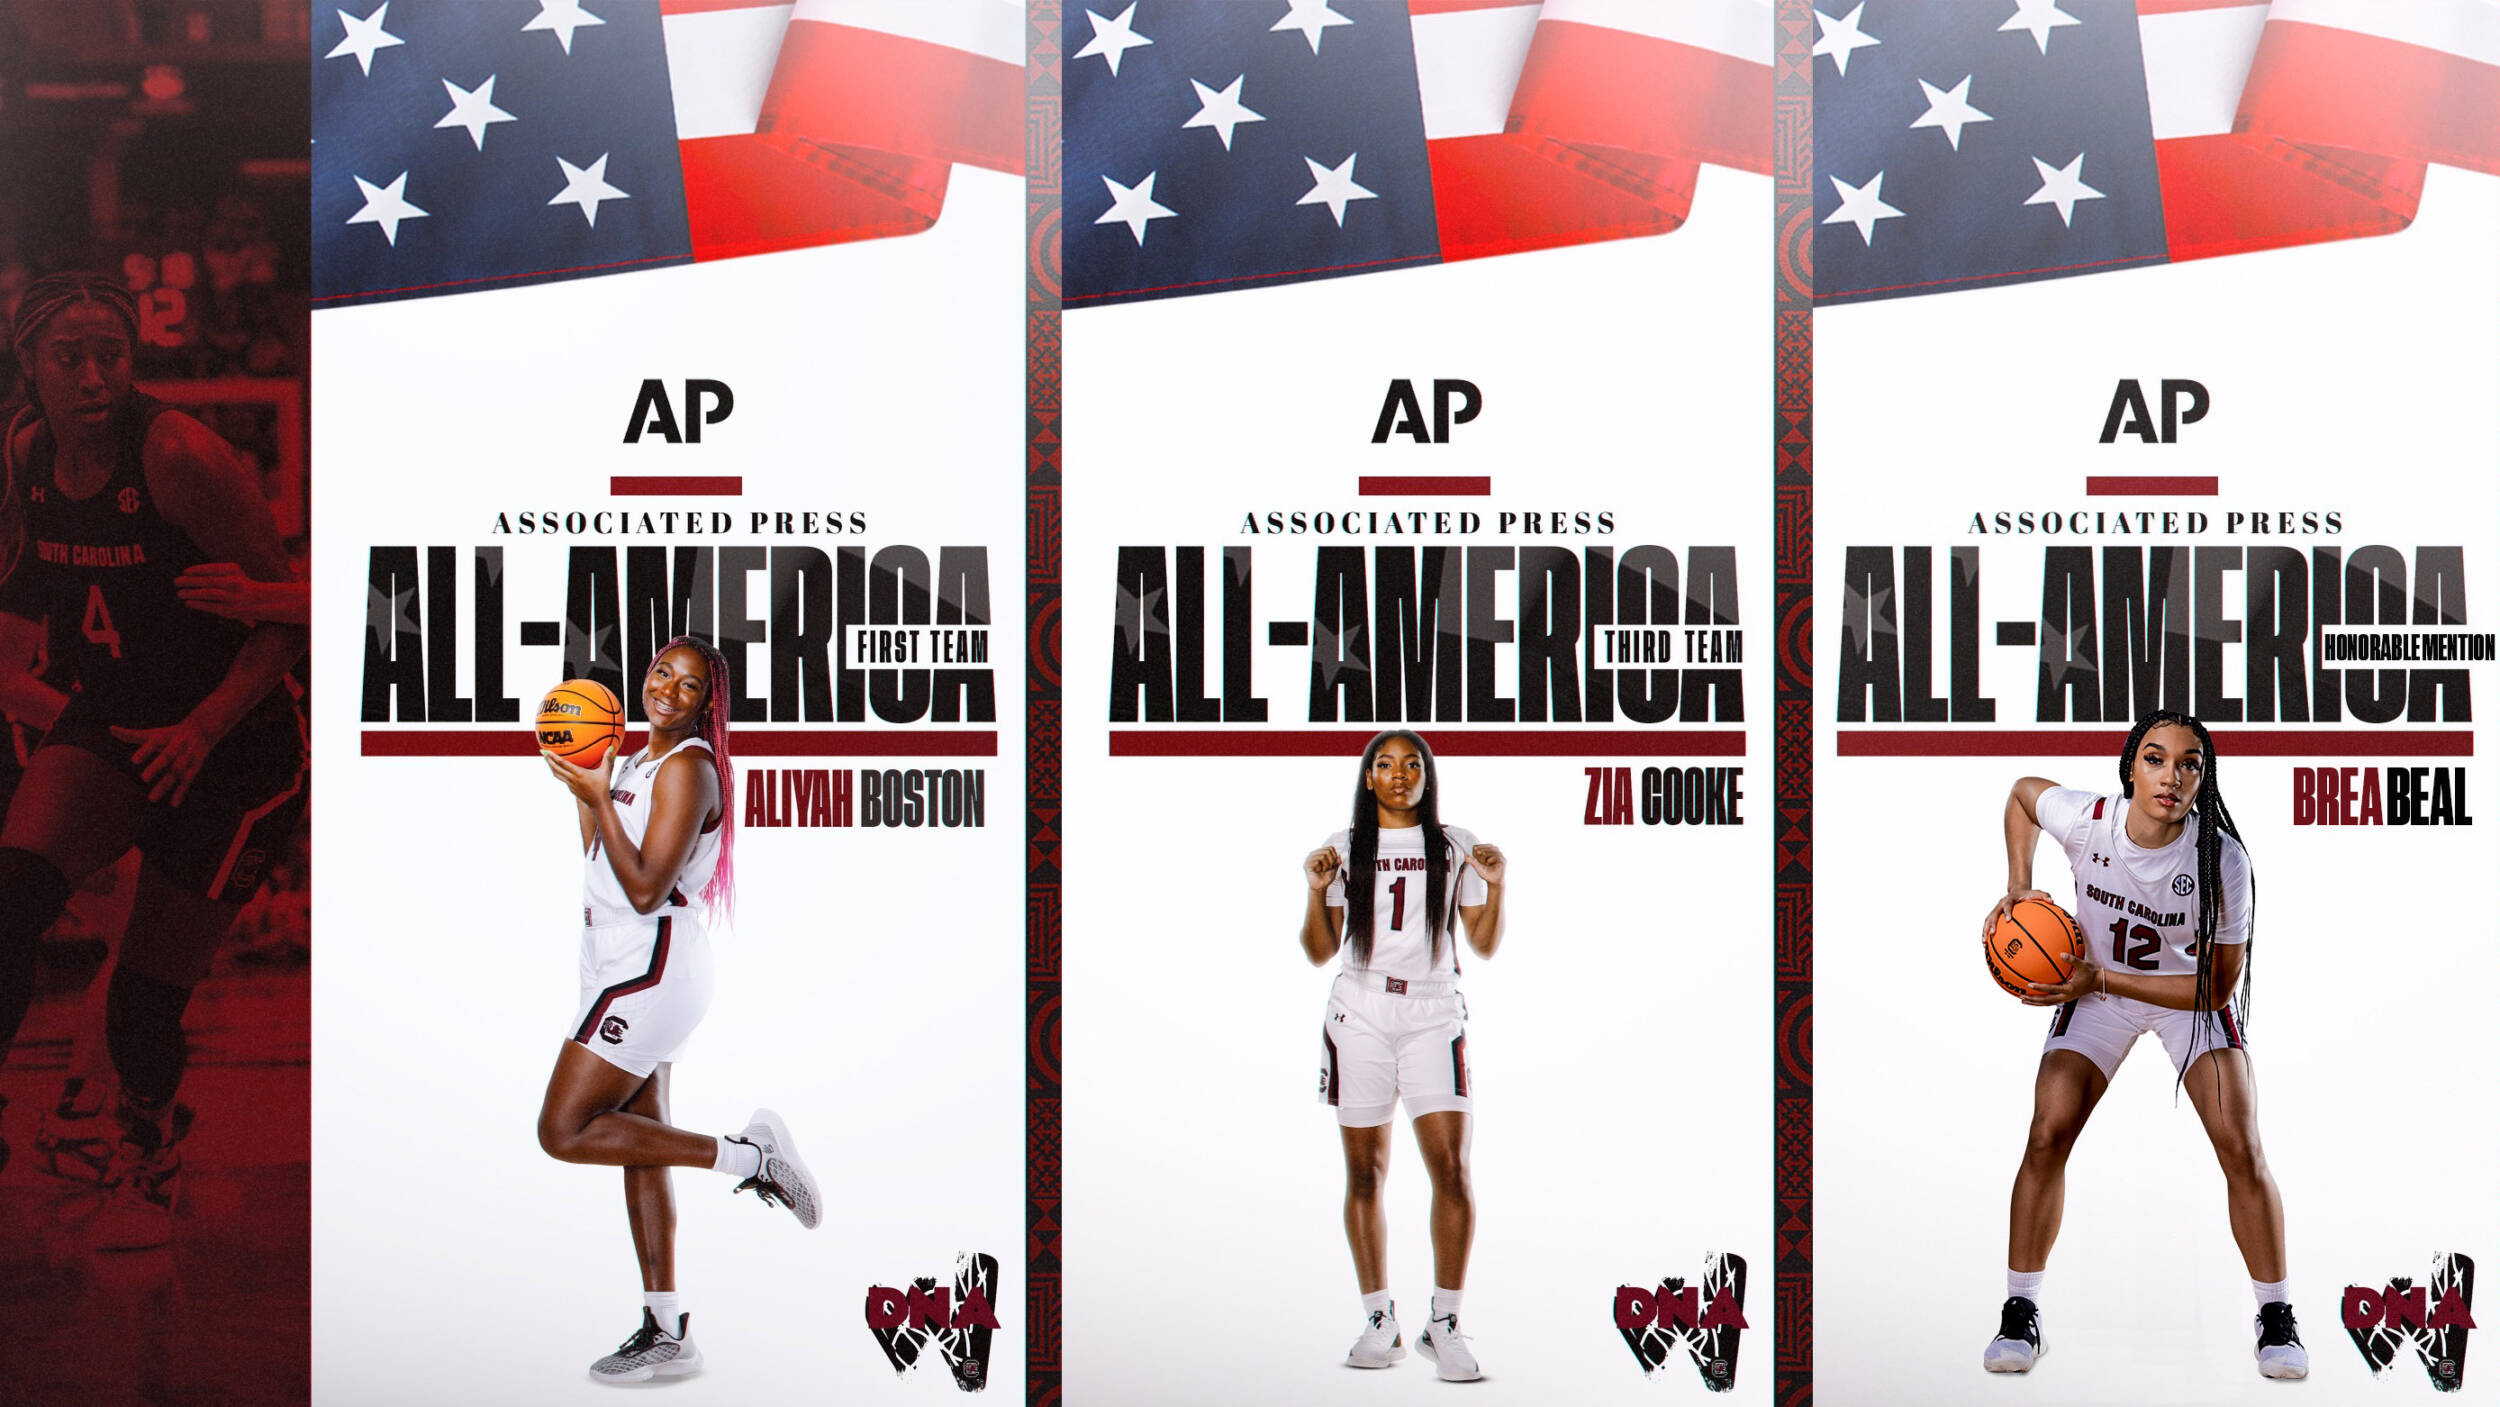 Gamecock Trio Collects All-America Honors